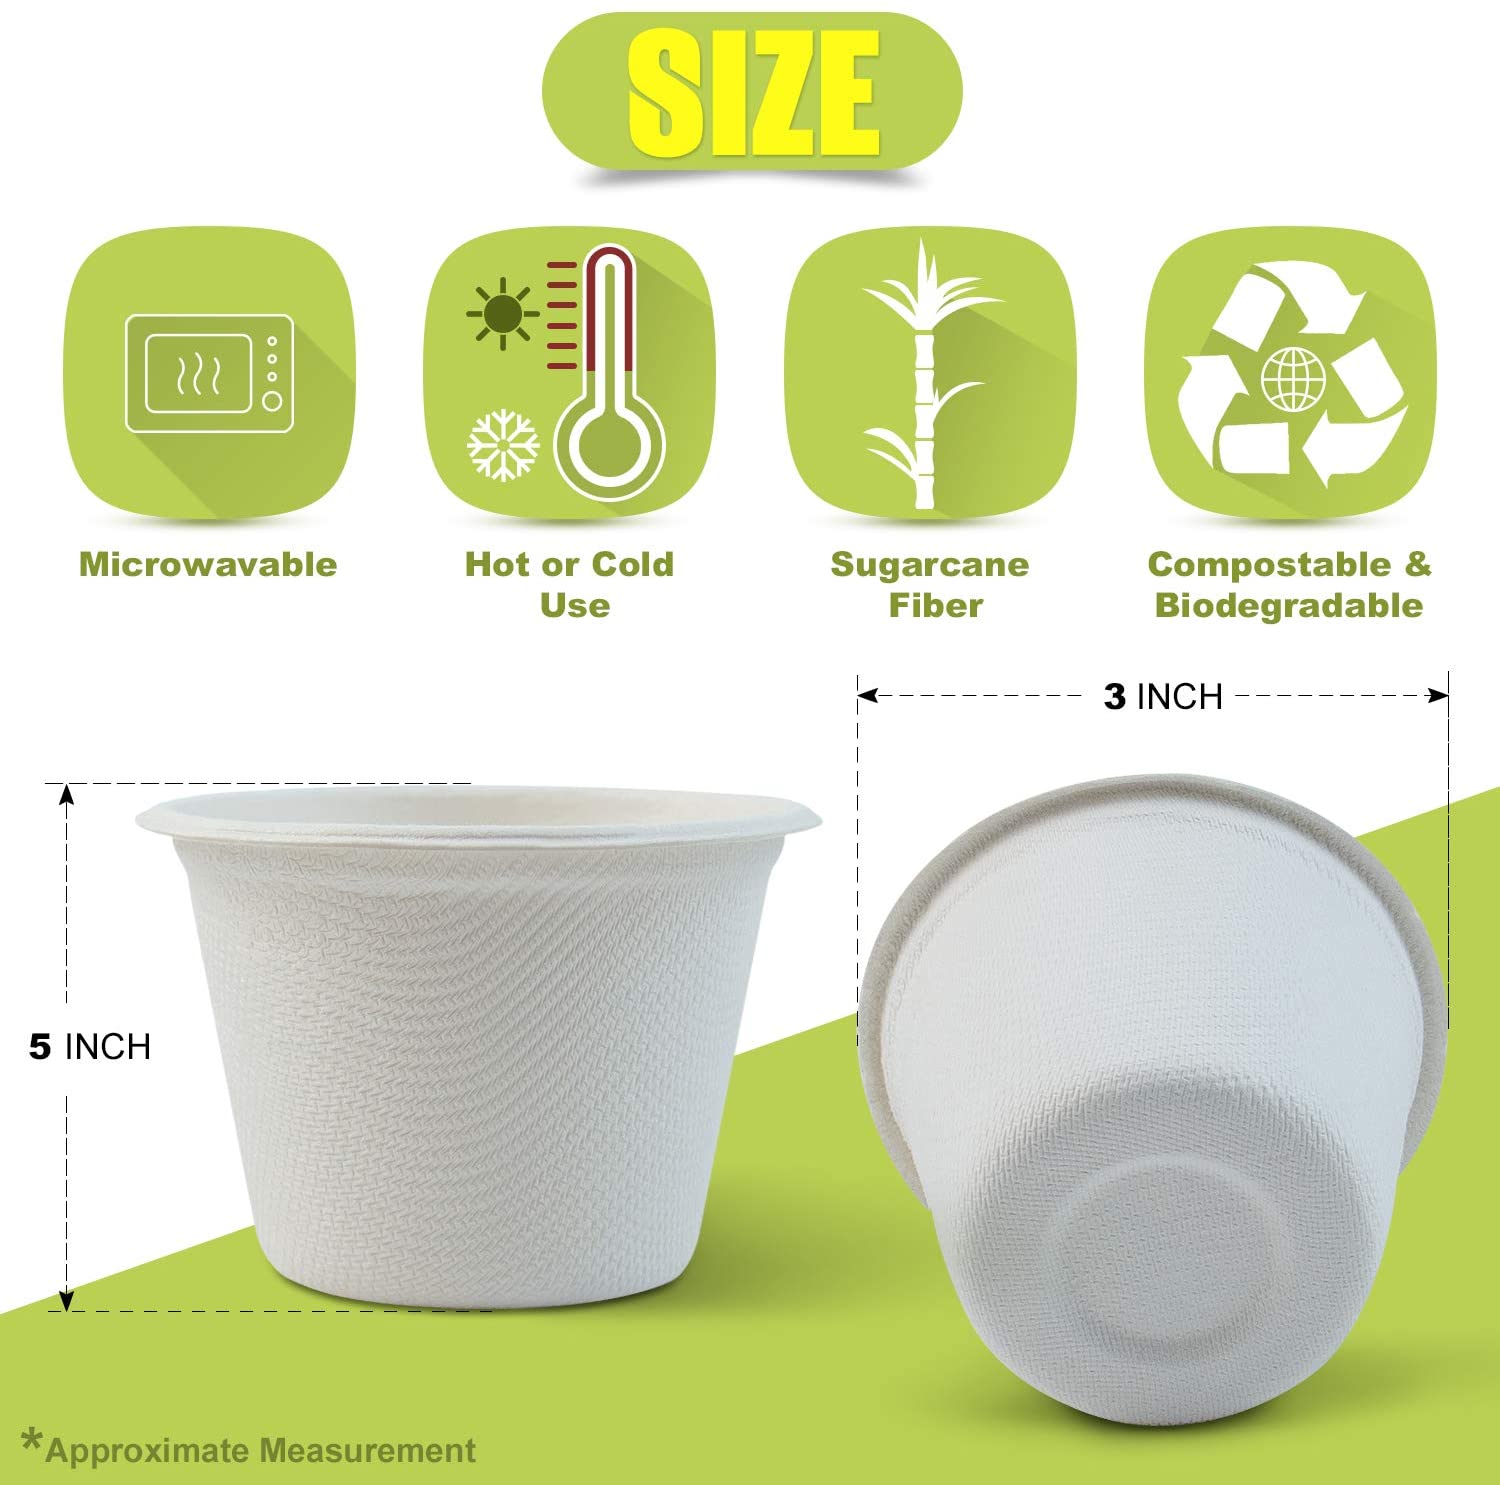 Kids Biodegradable Coffee Take Away With Bowl Disposable Ice Cream Cup